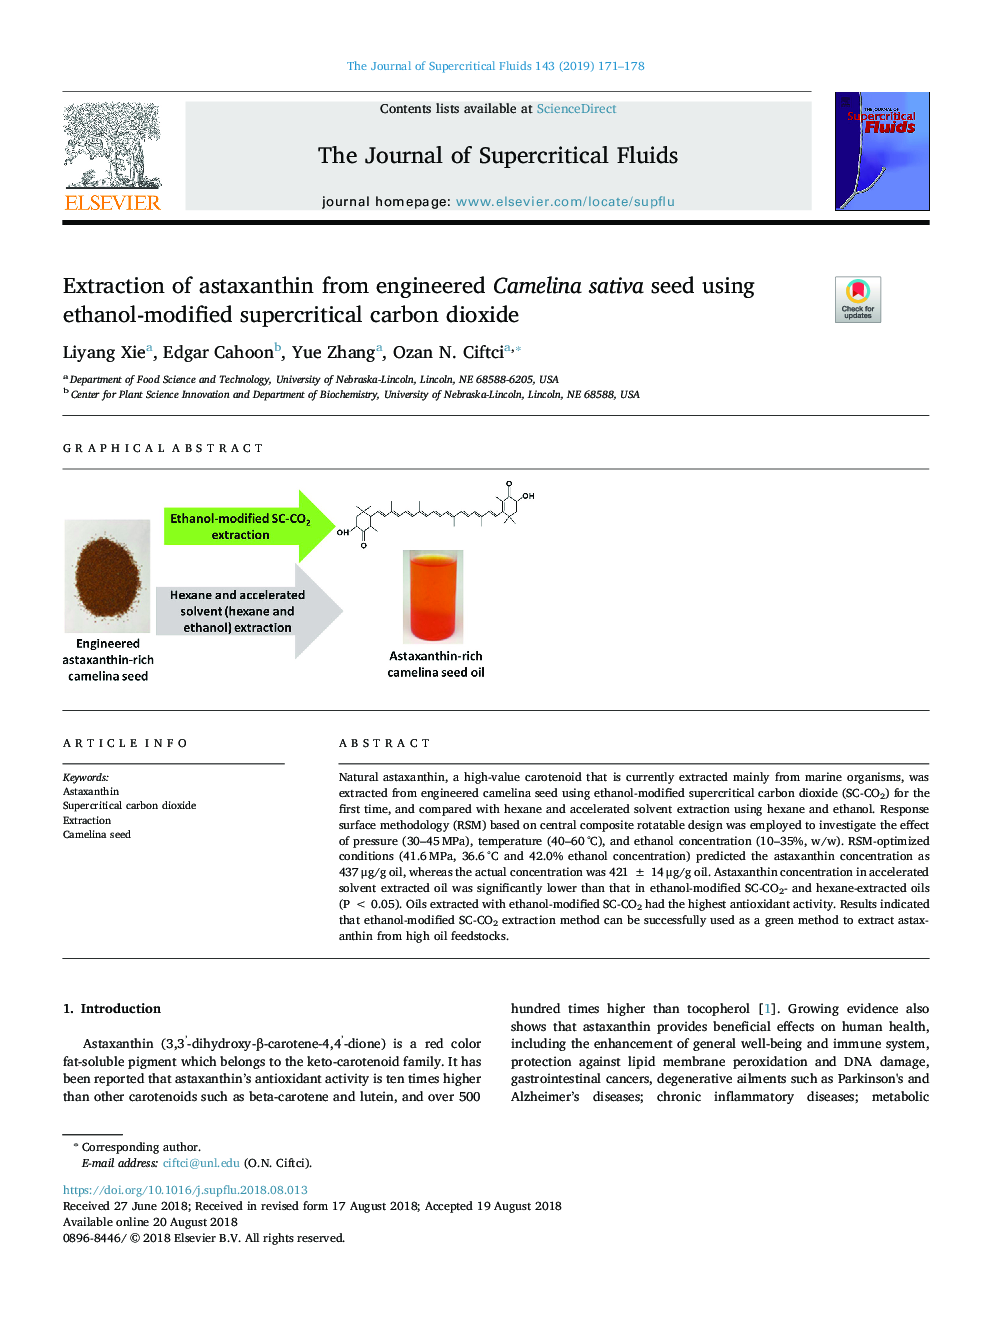 Extraction of astaxanthin from engineered Camelina sativa seed using ethanol-modified supercritical carbon dioxide